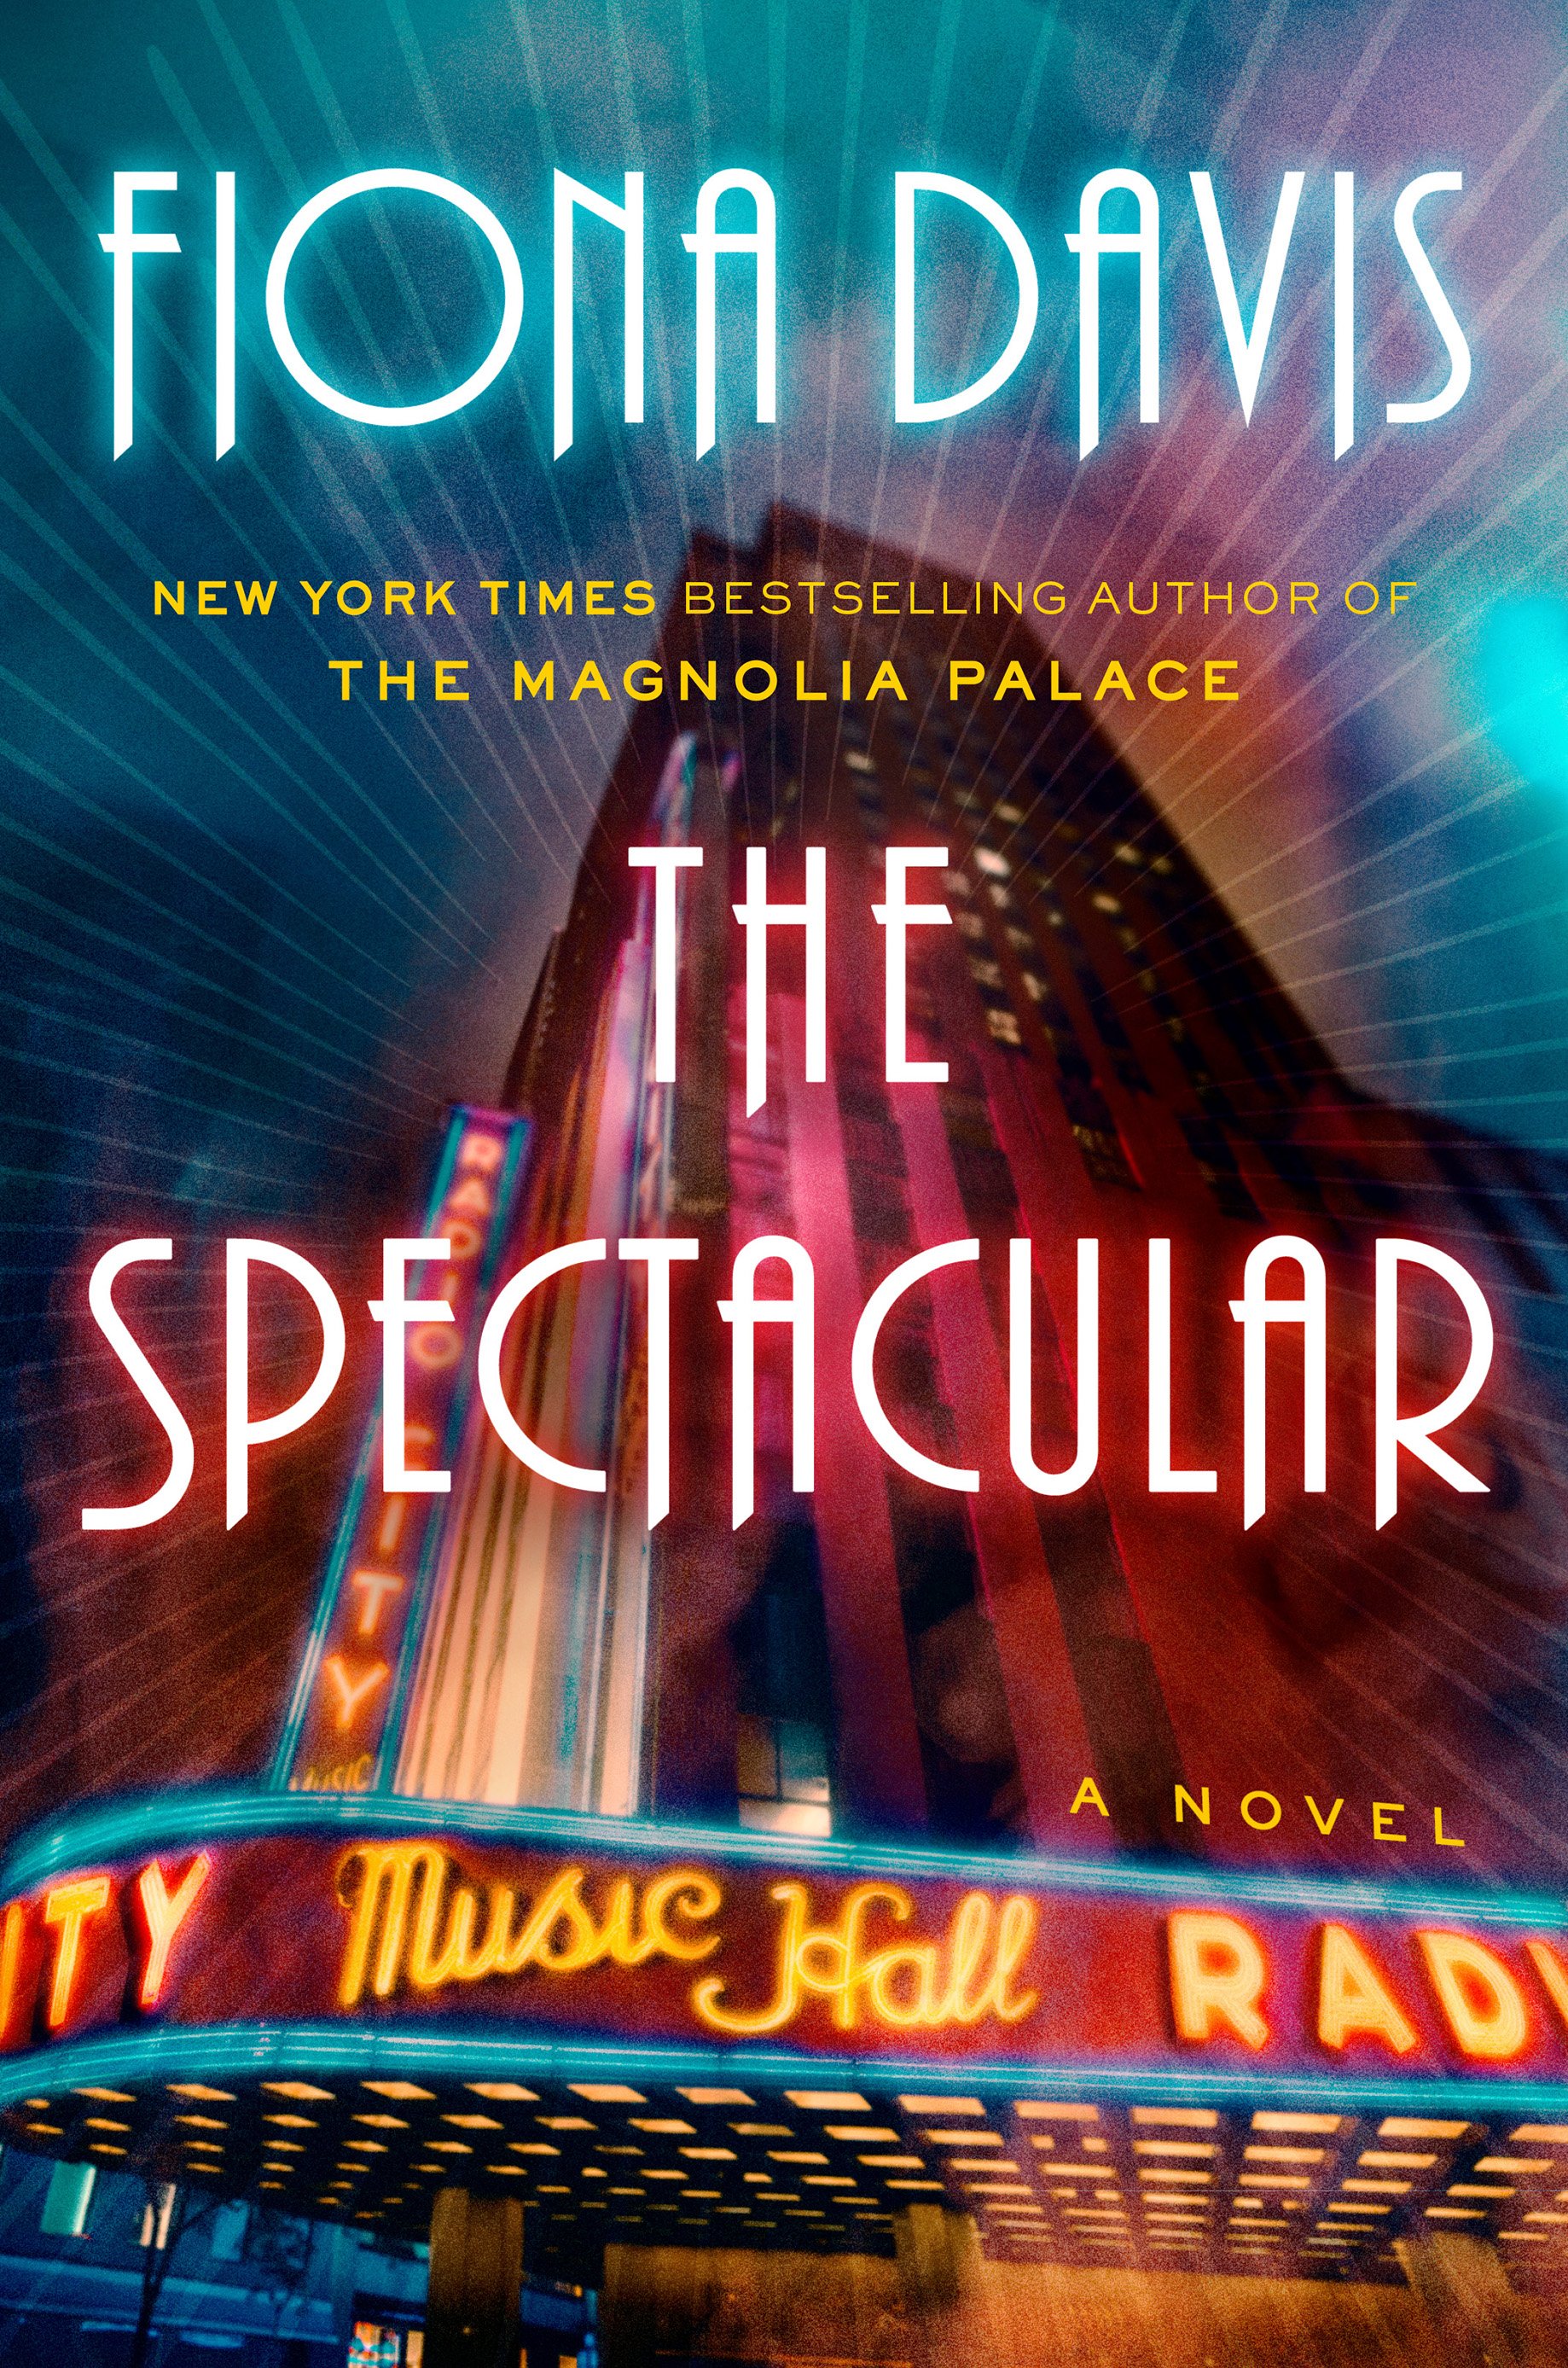 TheSpectacular Cover.jpg